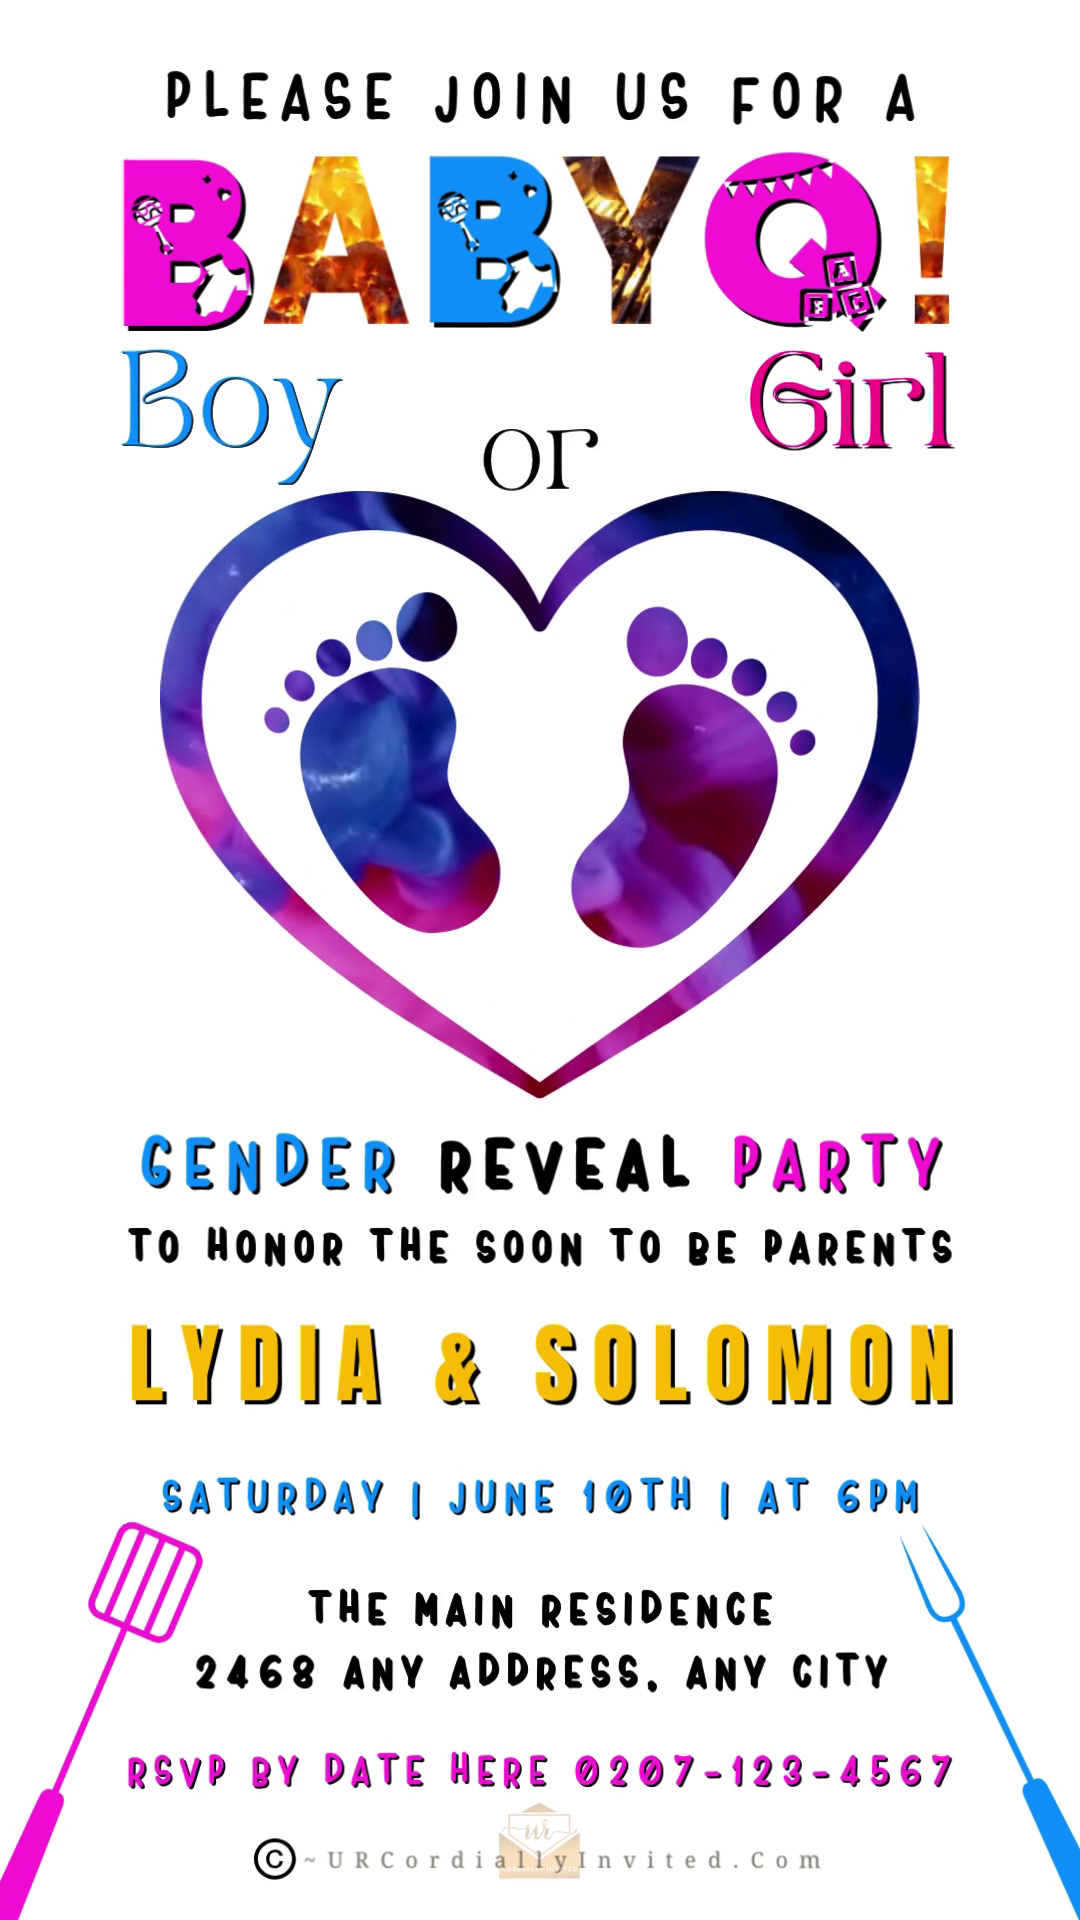 BABYQ Feet In Heart | Digital Gender Reveal Video Invite showing baby footprints in a heart shape, customizable via Canva for digital sharing.